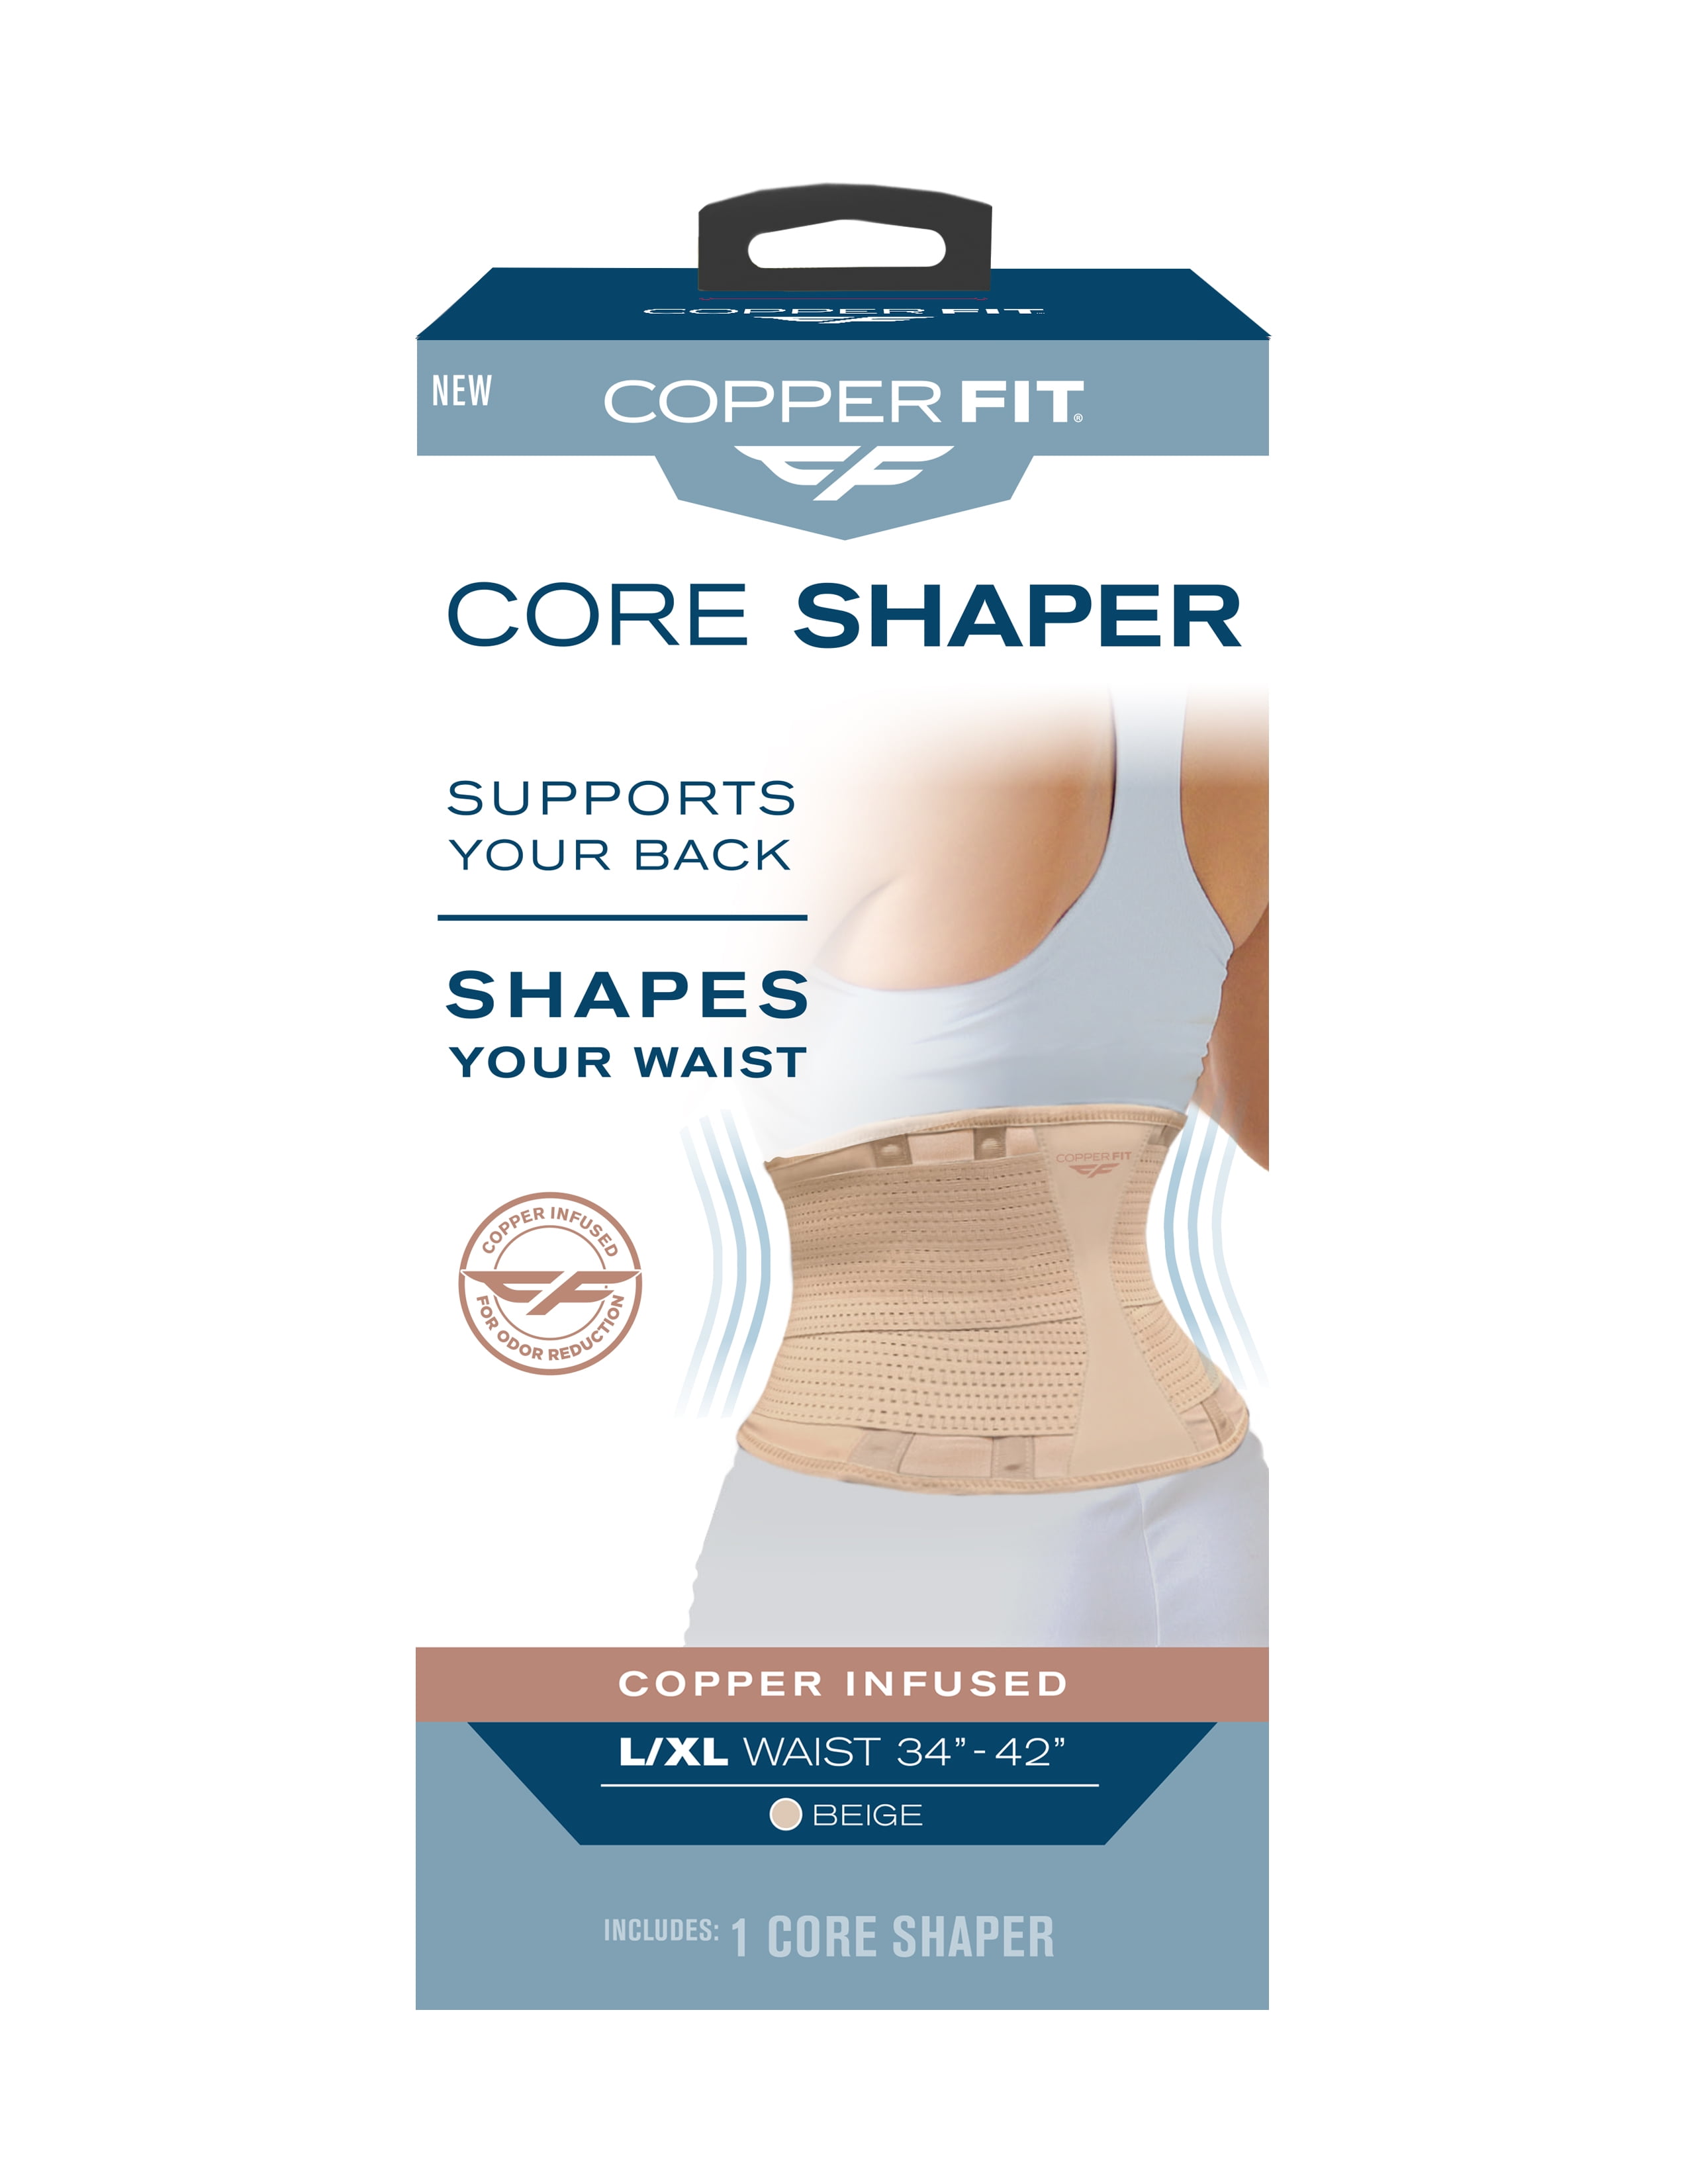 Copper Fit® Core Shaper, Supports Back and Shapes Waist, Copper Infused,  Beige, L/XL